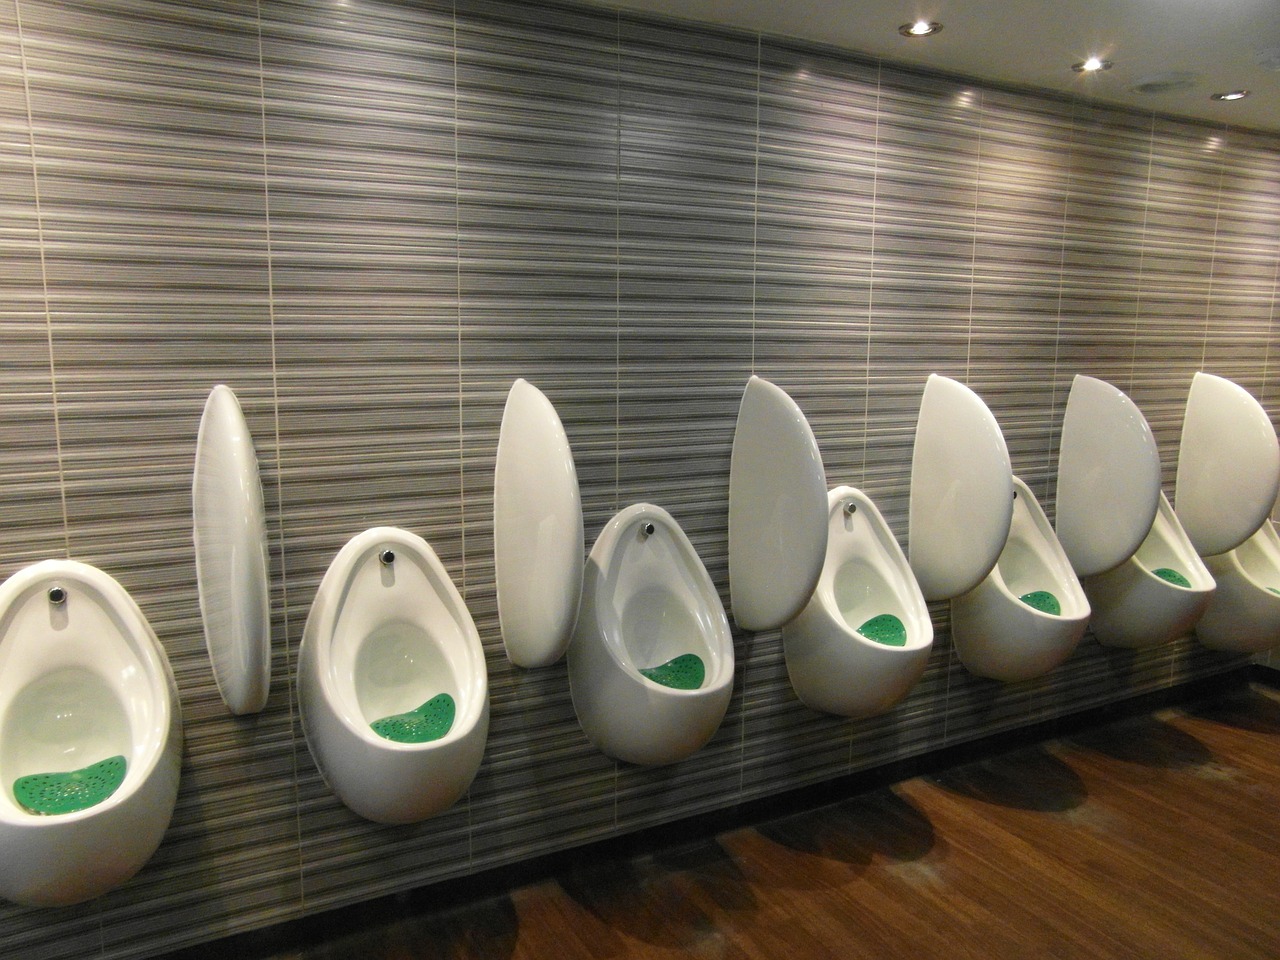 4 Causes of Odors in the Restroom and how to get Rid of Them